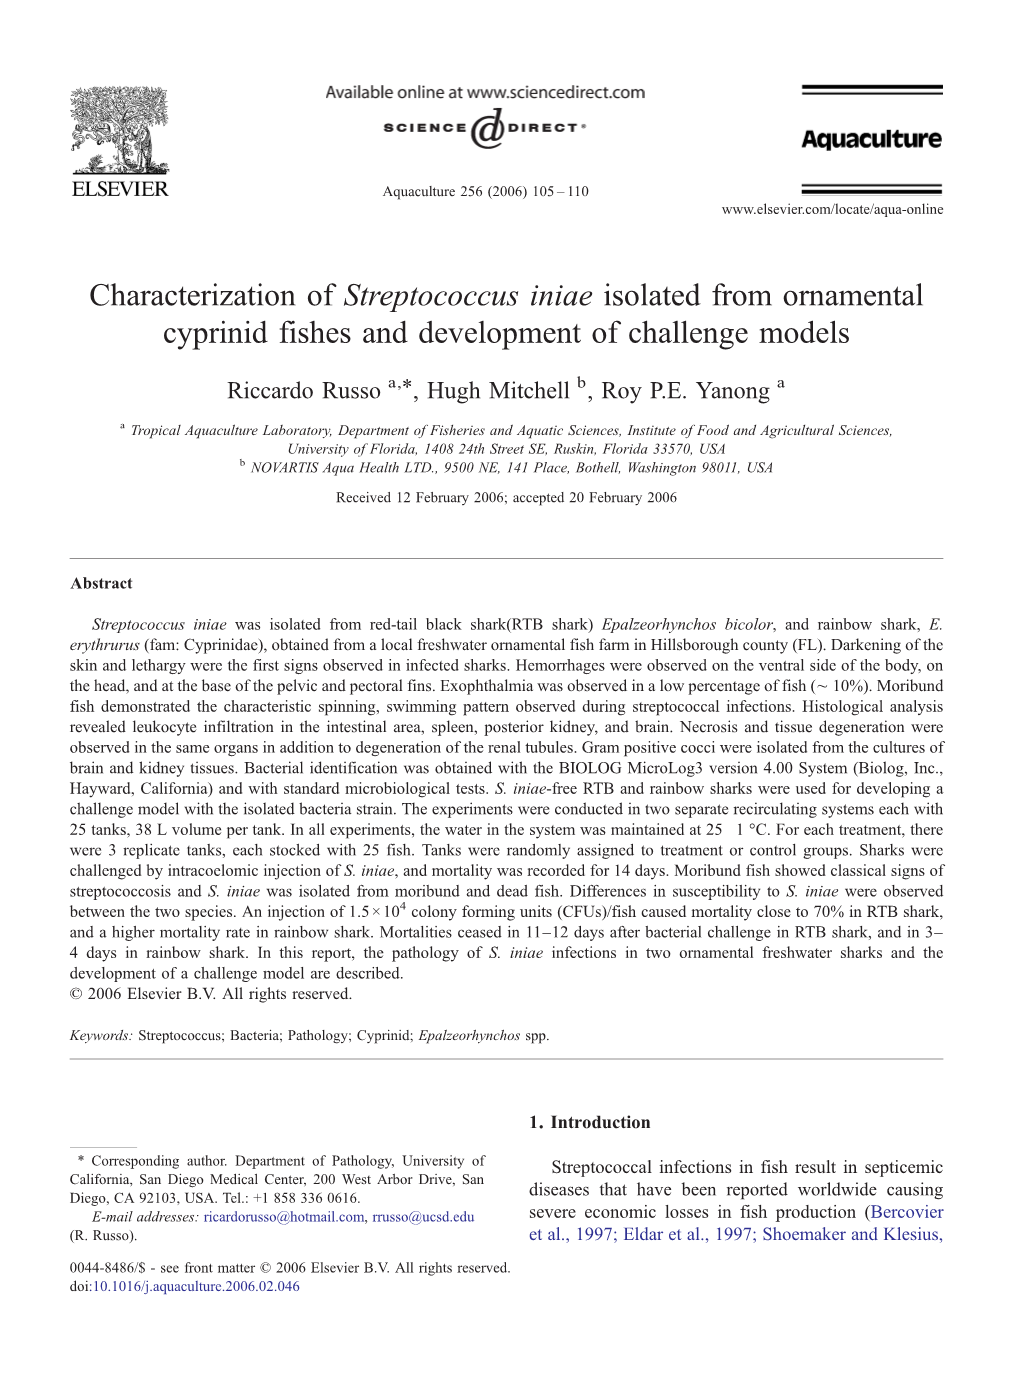 Characterization of Streptococcus Iniae Isolated from Ornamental Cyprinid Fishes and Development of Challenge Models ⁎ Riccardo Russo A, , Hugh Mitchell B, Roy P.E